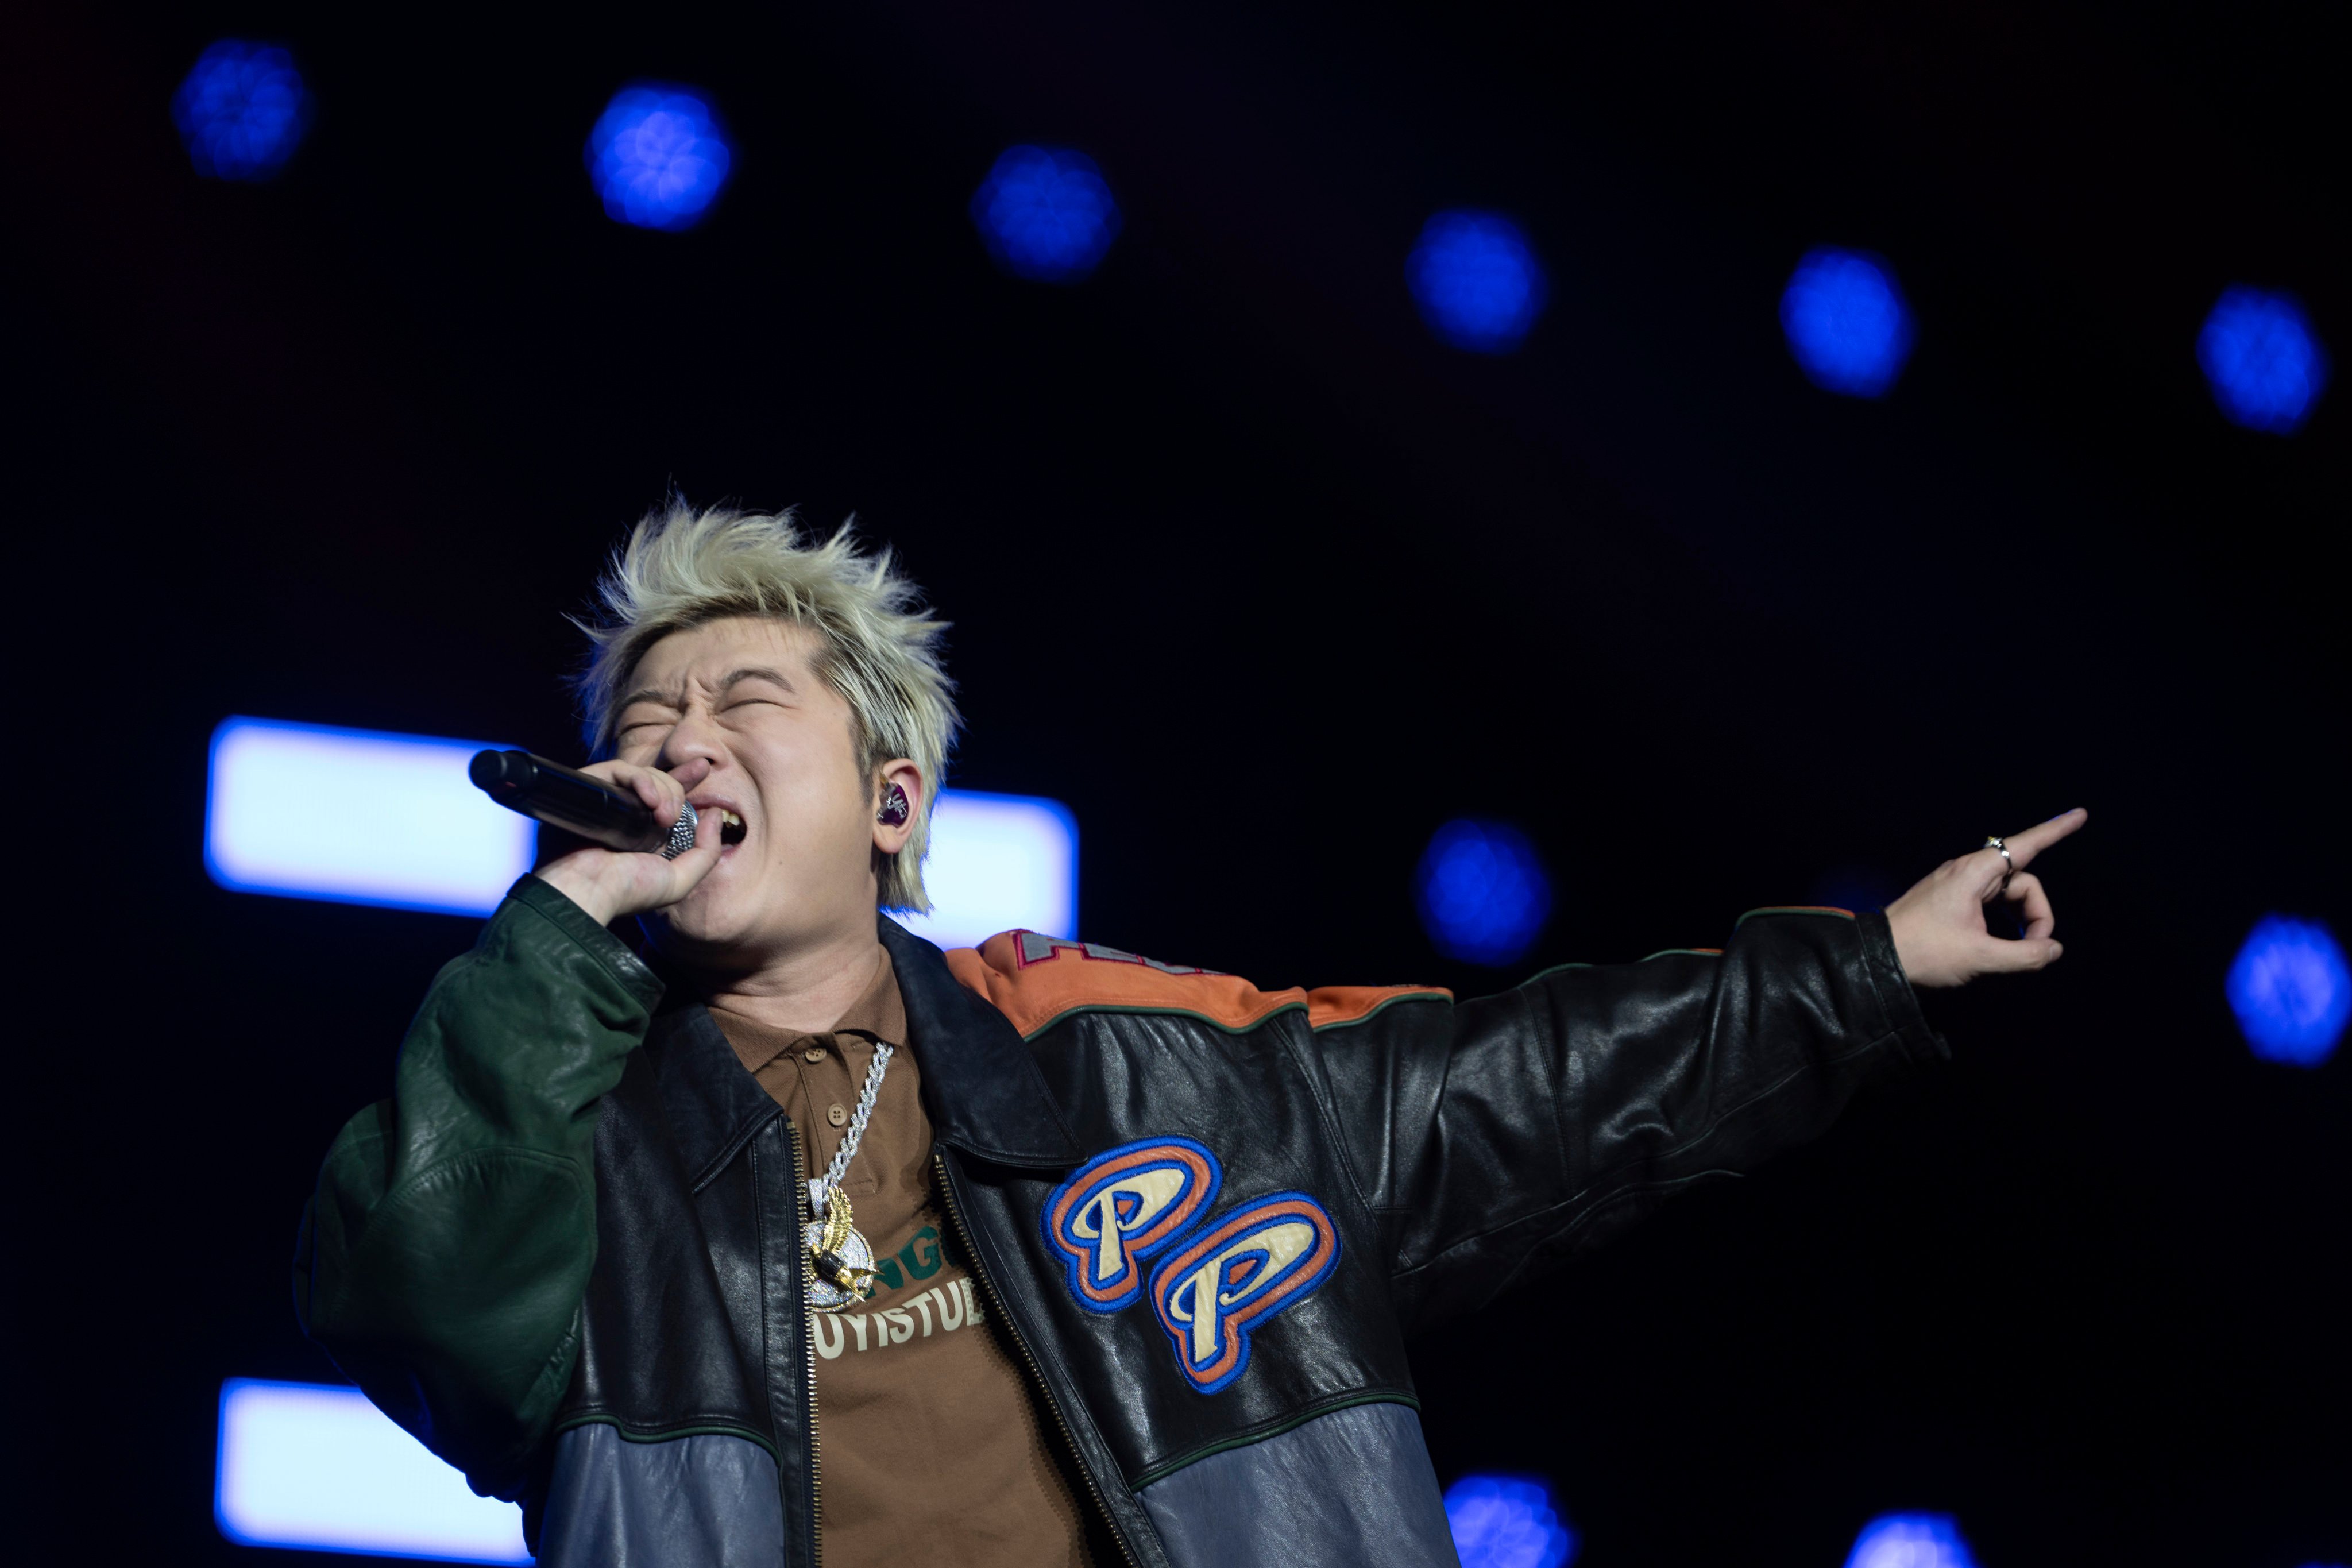 Chinese rapper Wang Yitai performs at a concert in Chengdu in China’s Sichuan province. For a while in 2018, hip hop was censored in China. Photo: AP